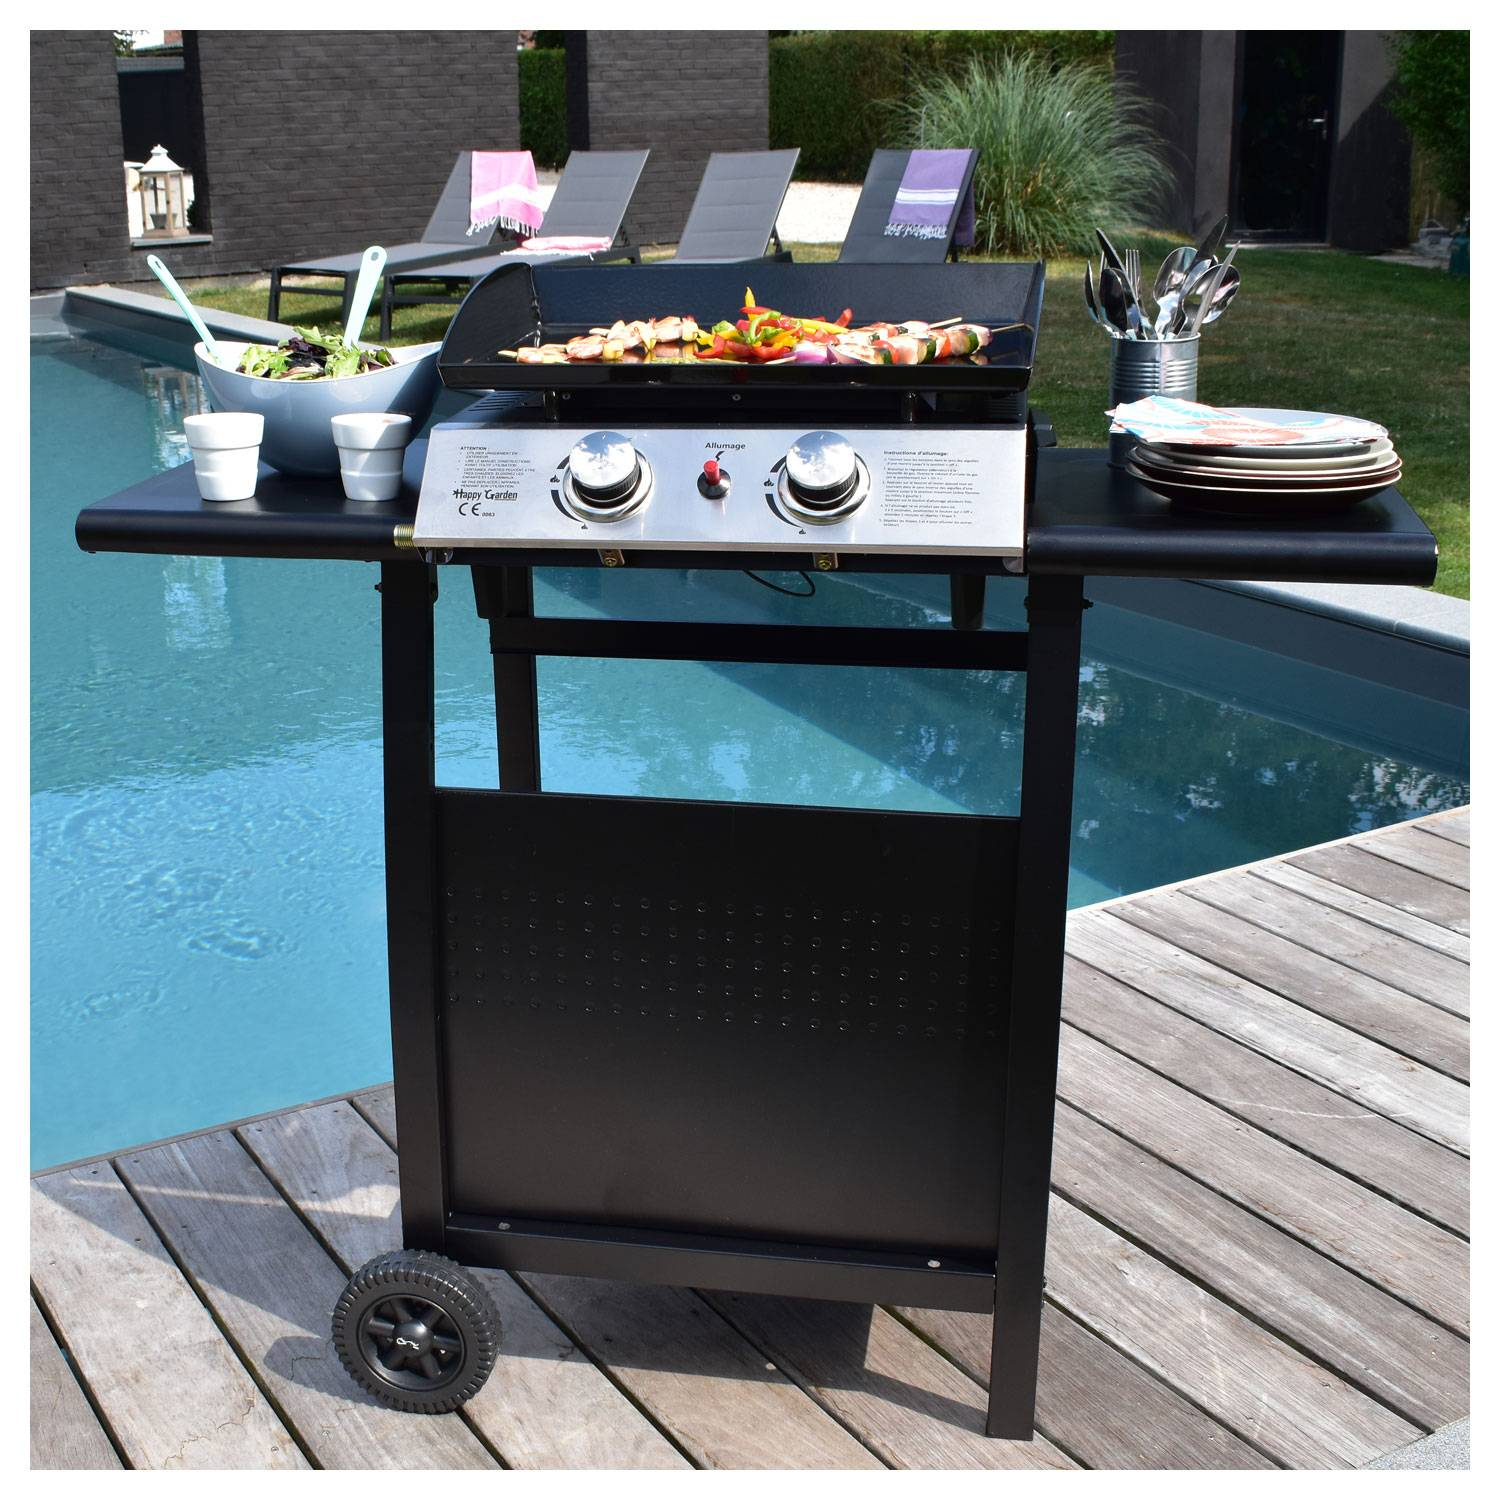 BRUT PLANCHA TABLE + Grill